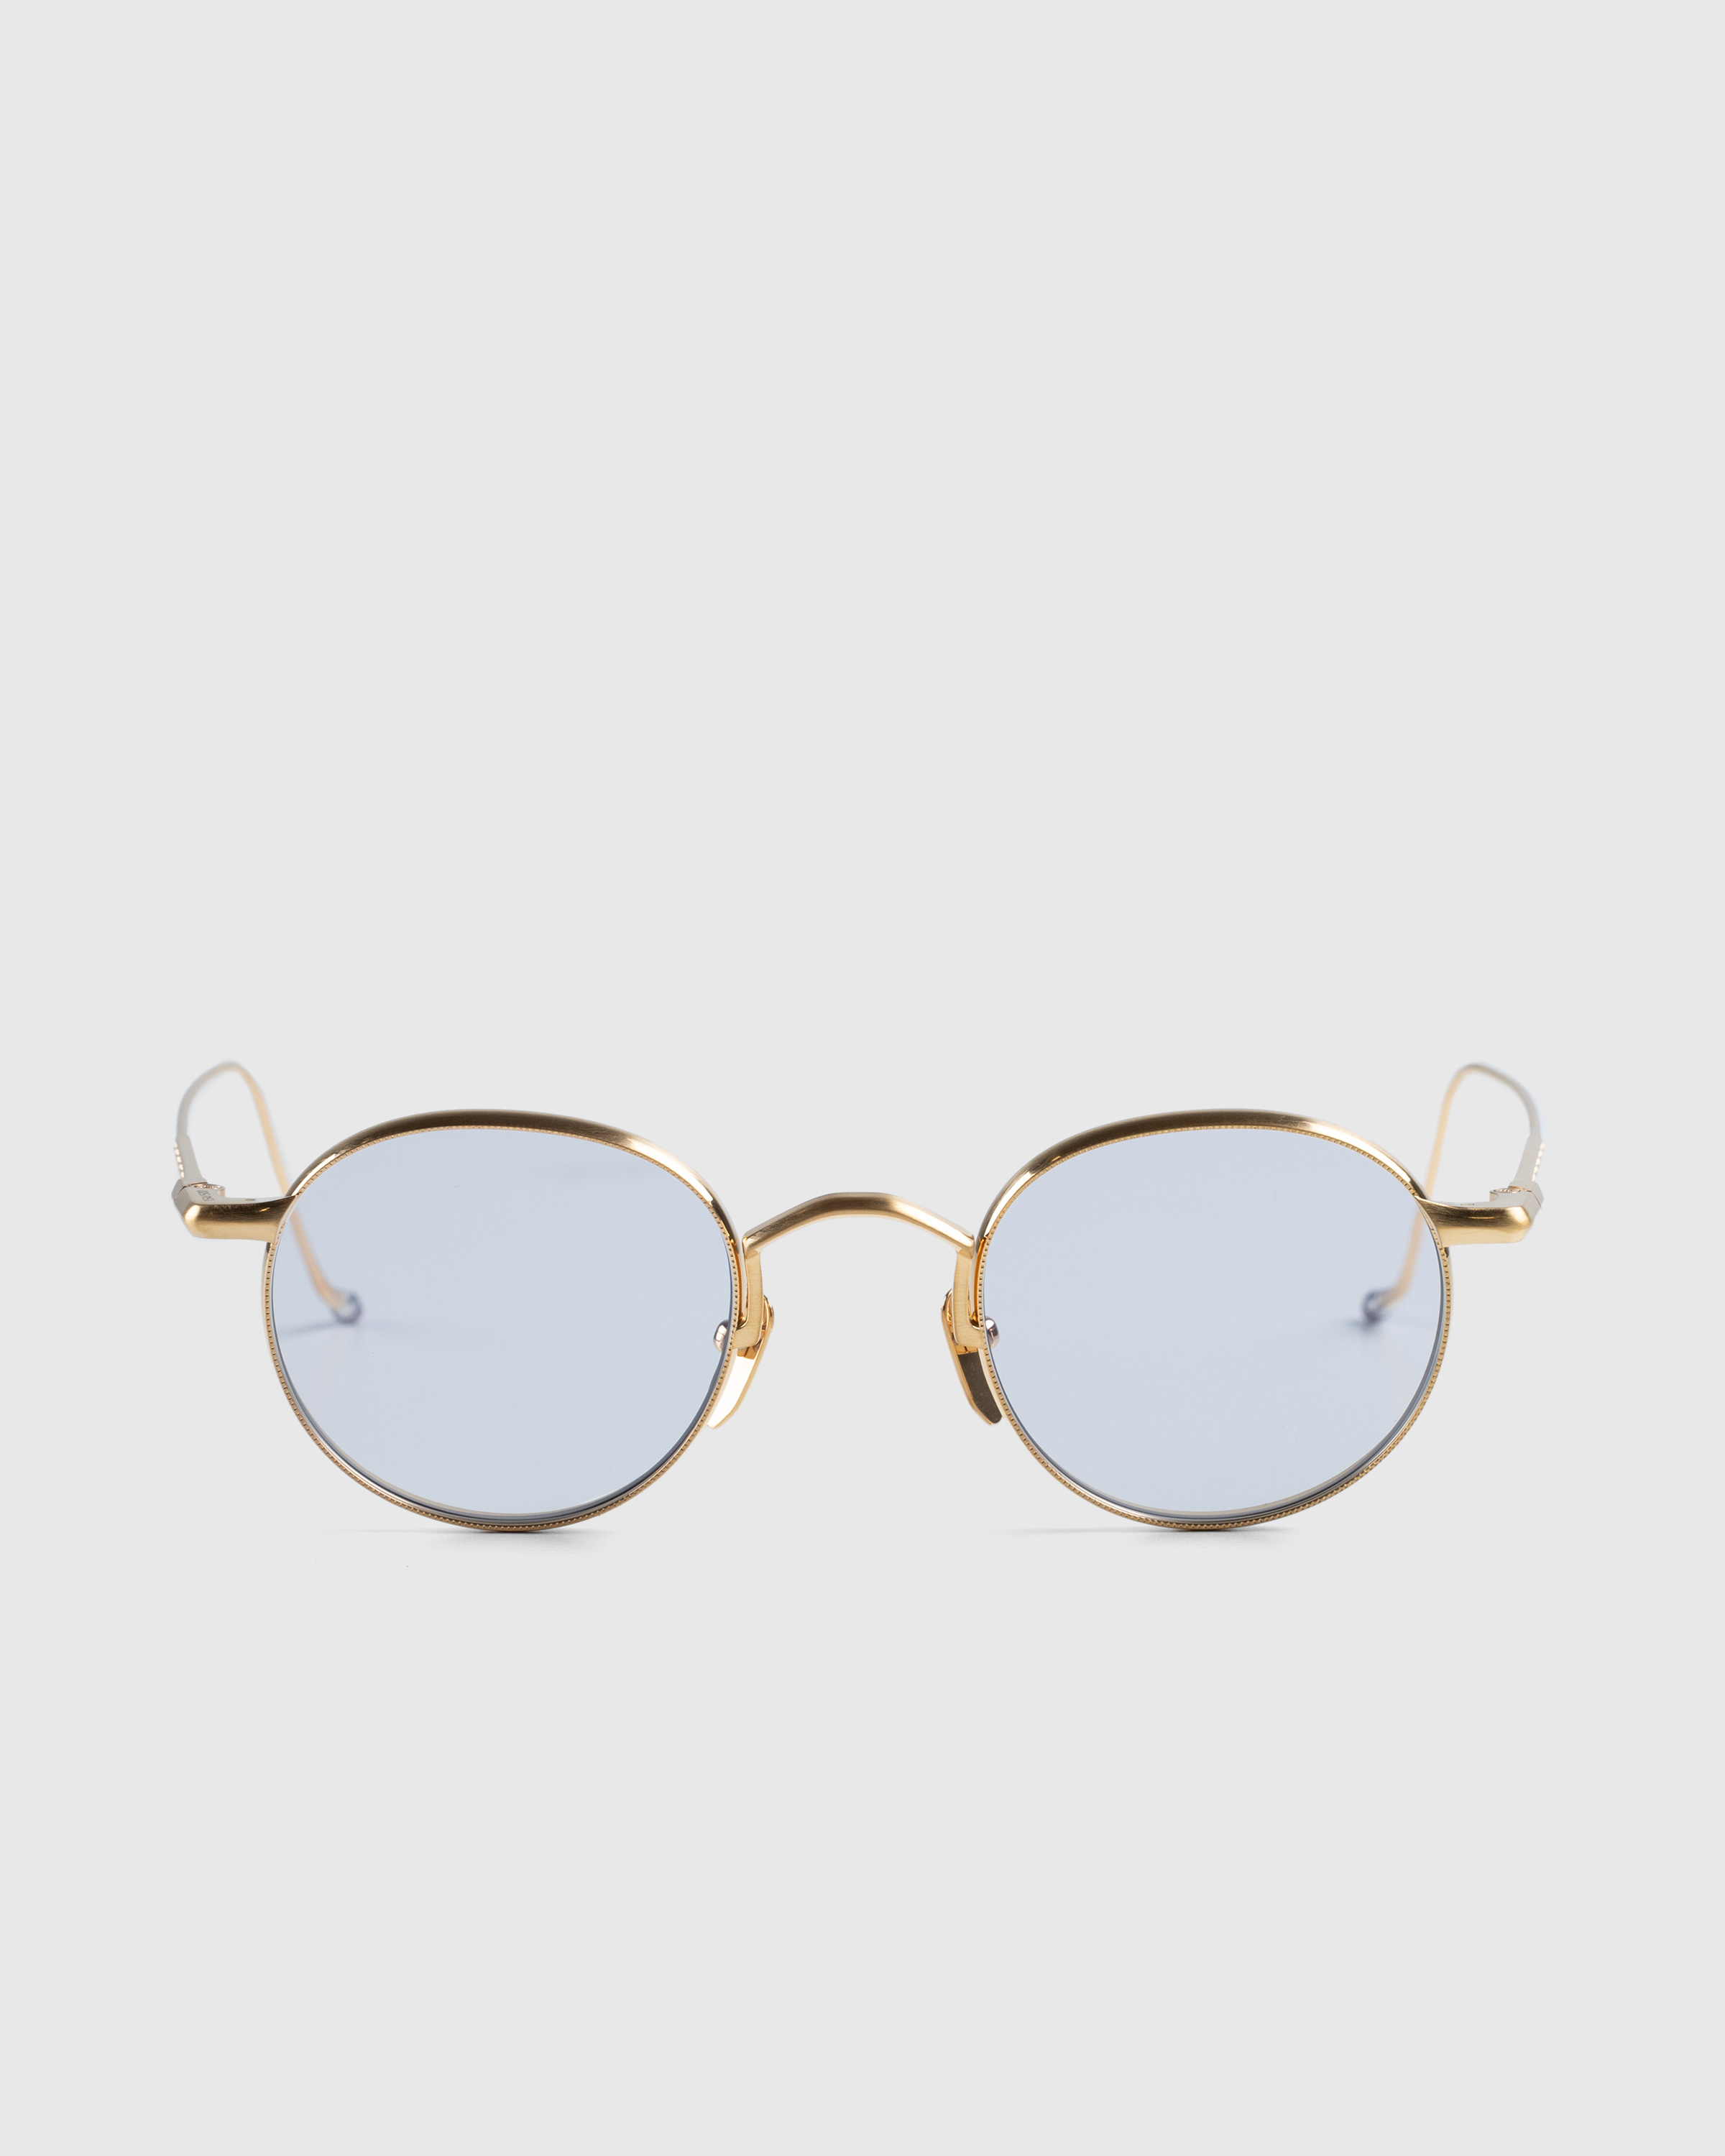 Jacques Marie Mage – Full Metal Jacket Gold - Sunglasses - Gold - Image 1